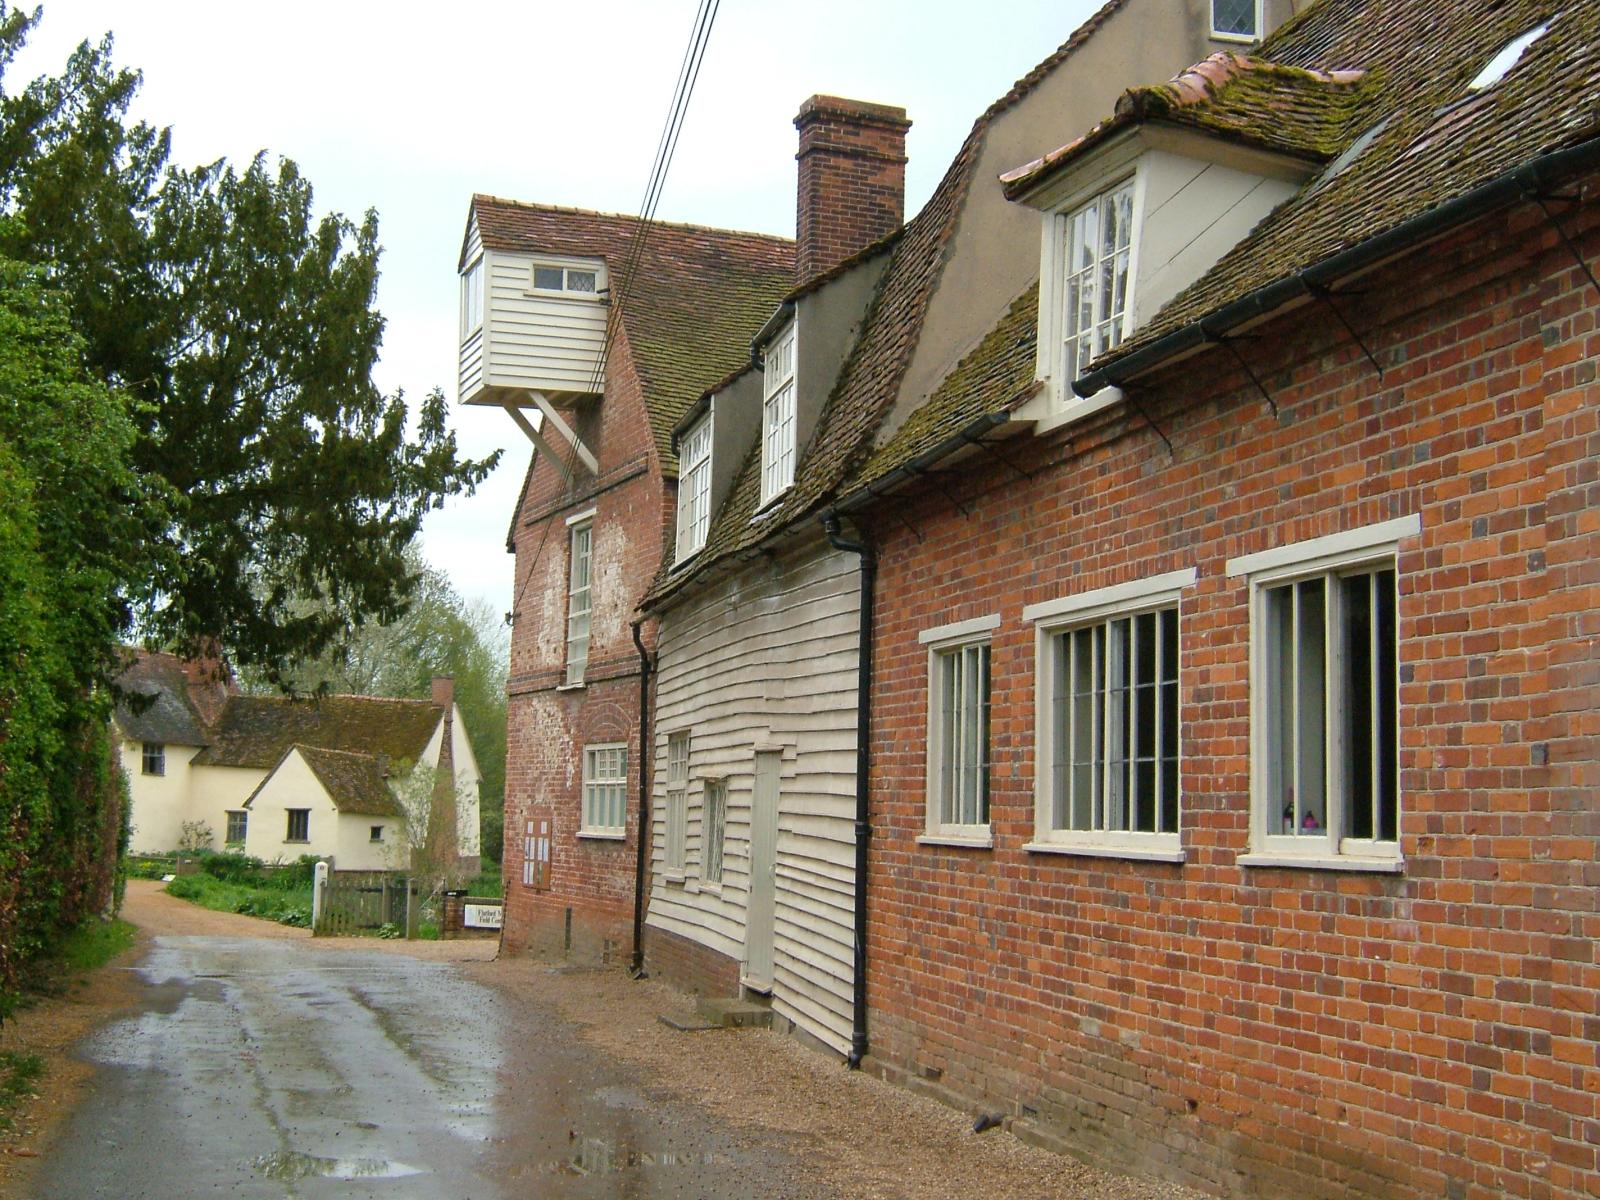 a narrow street that leads to several small homes